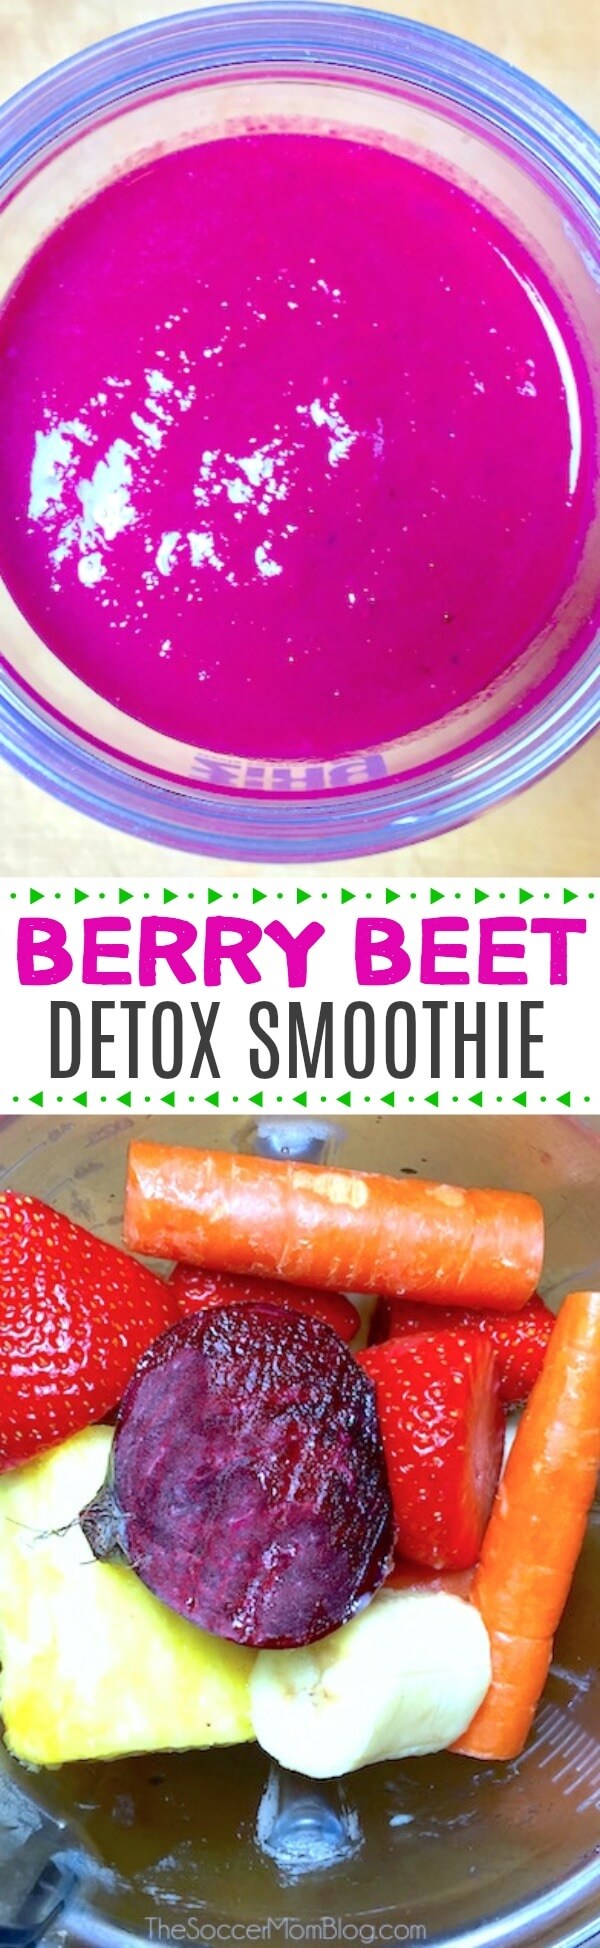 Packed with cleansing antioxidants, vitamins, and energy-boosting superfoods, this detox beet smoothie is one of my favorite ways to start the day! Oh, and it tastes absolutely delicious - fruity and smooth!